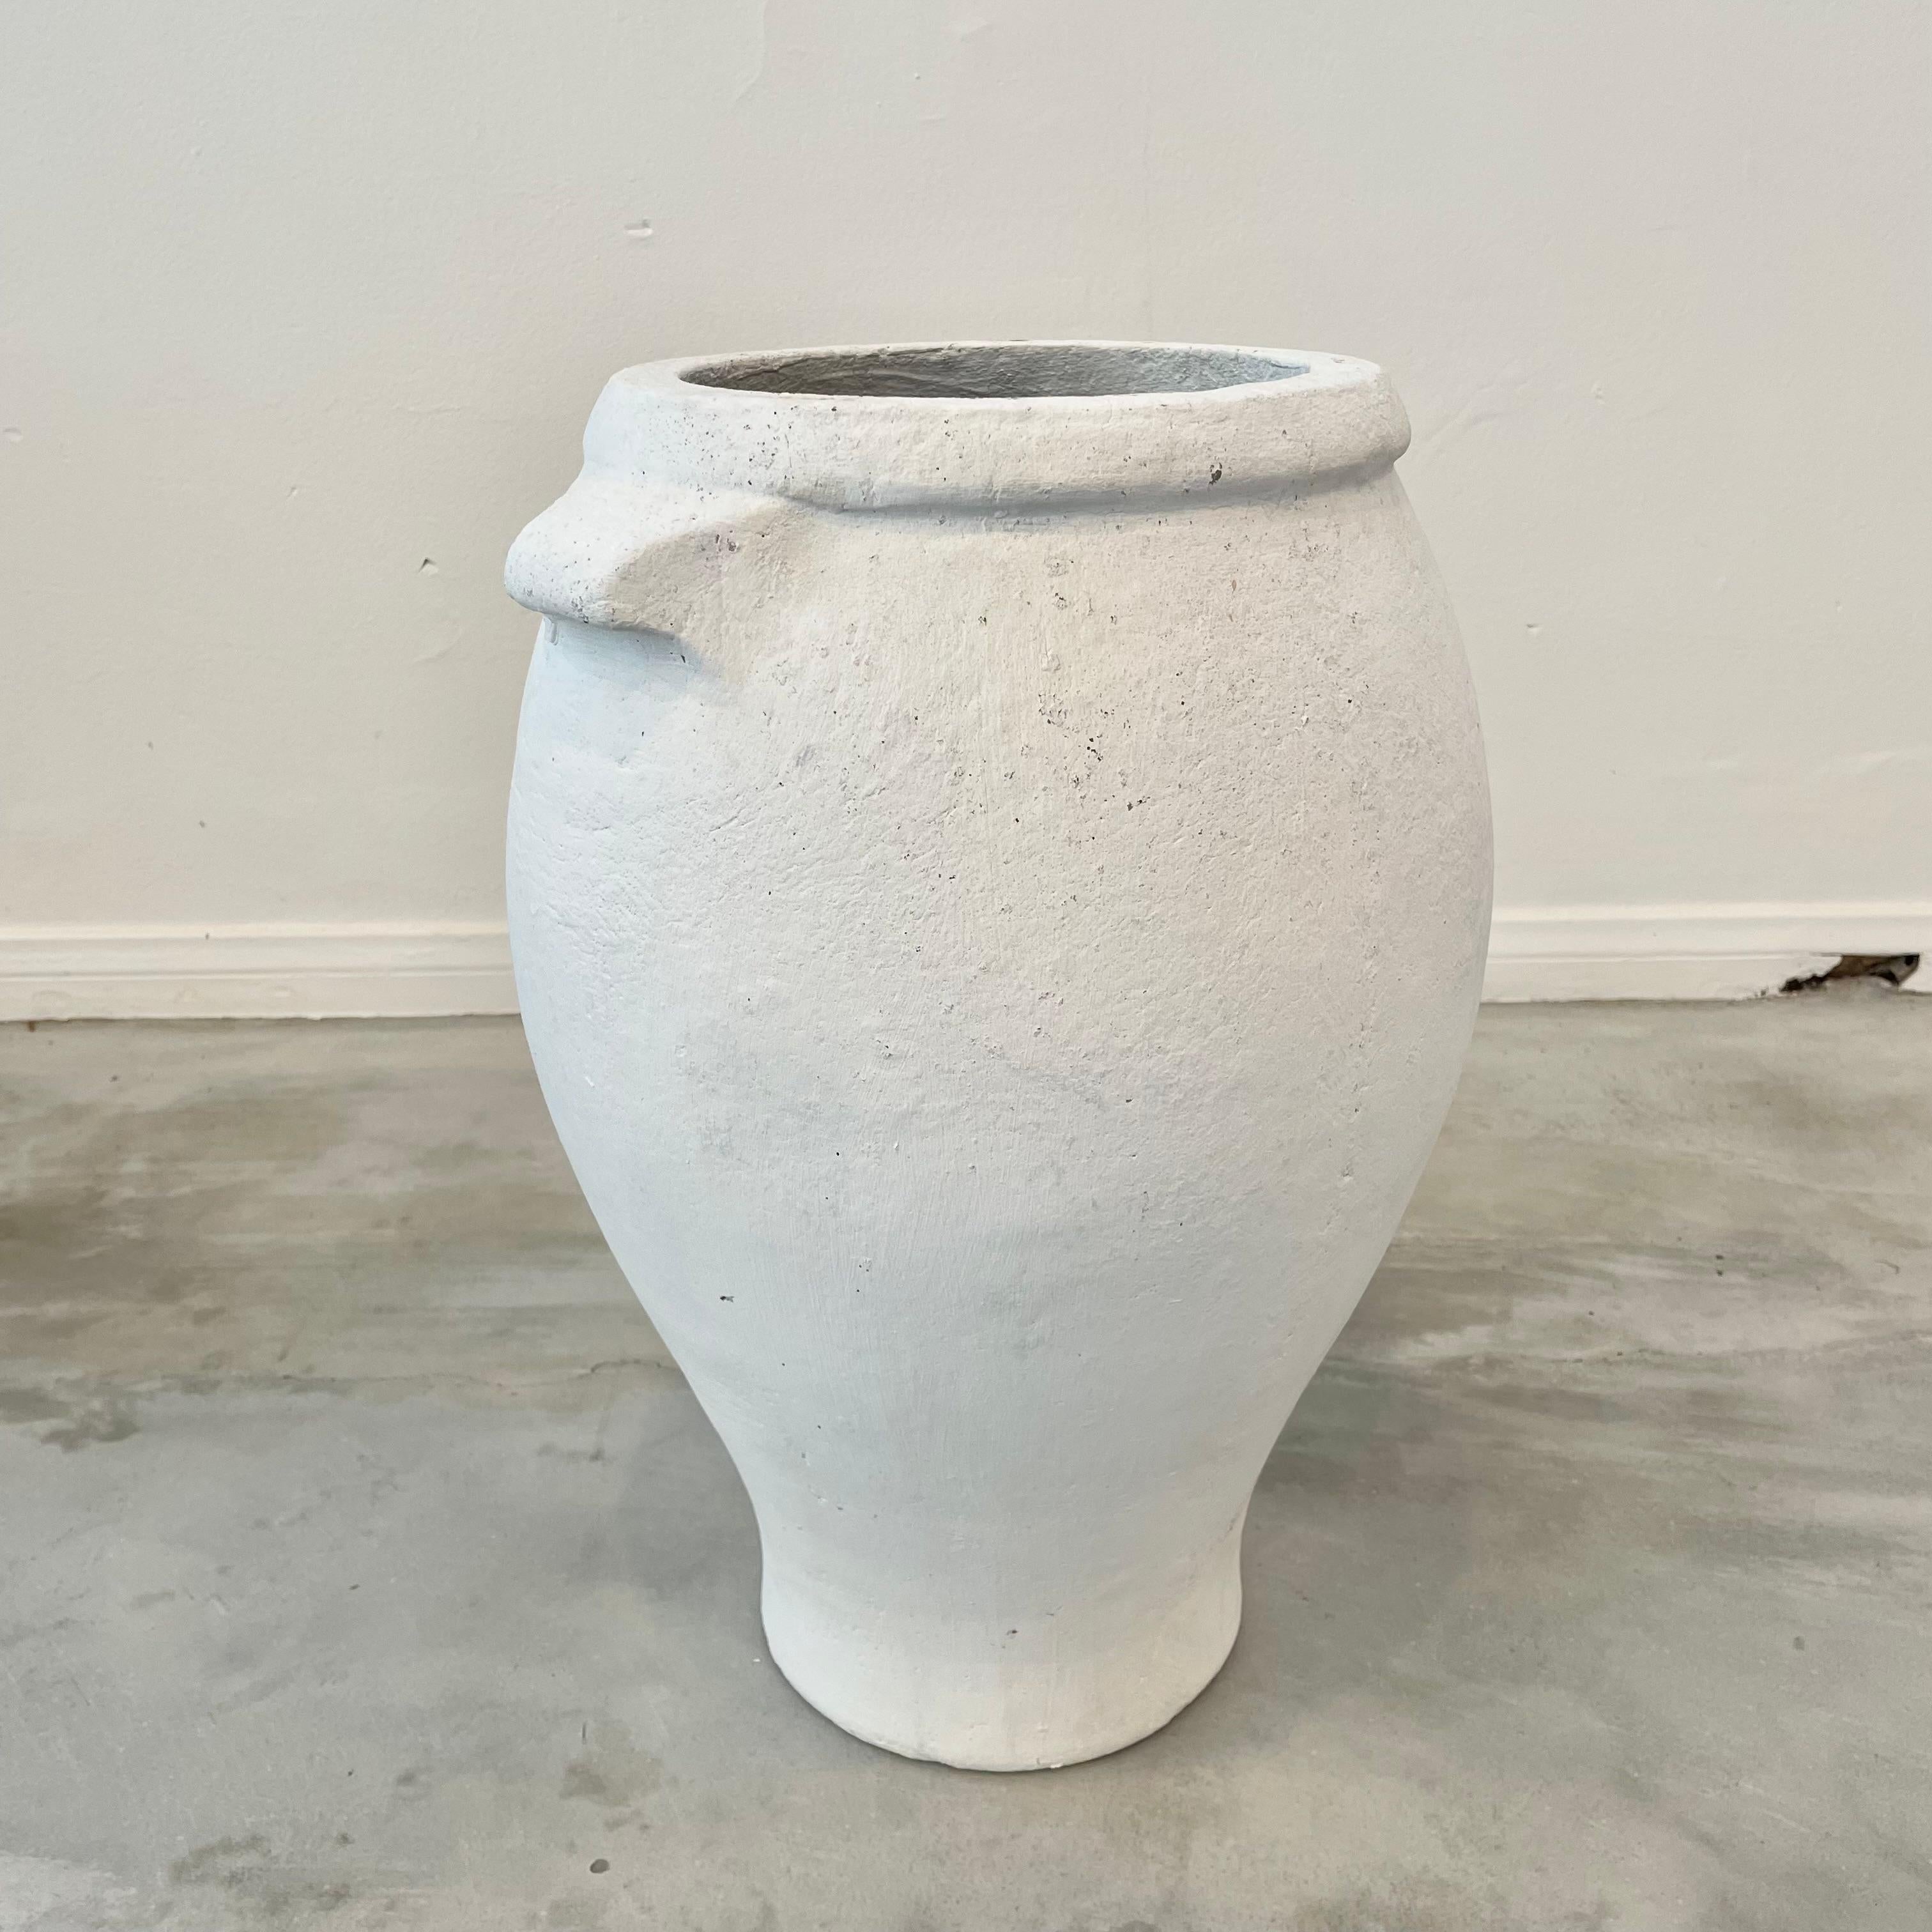 Swiss Willy Guhl Concrete Urn with Handles, 1960s Switzerland For Sale